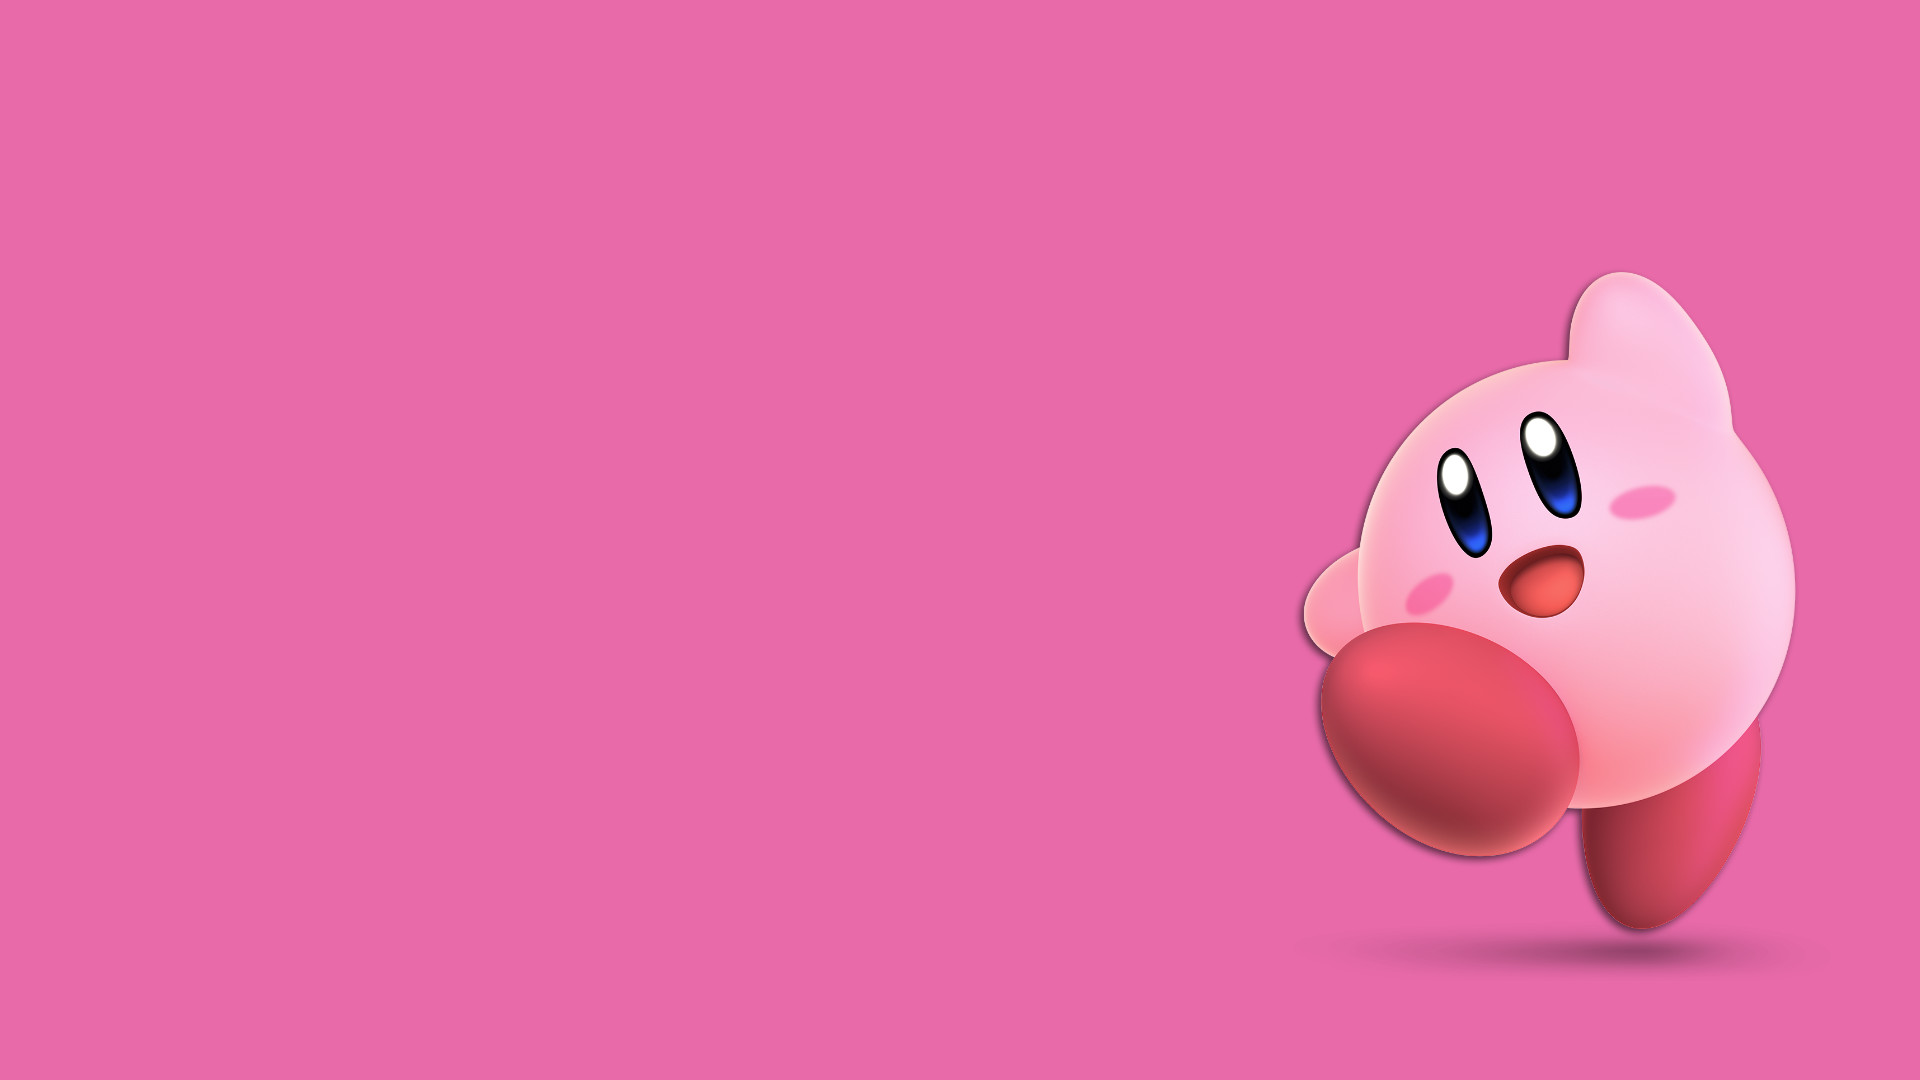 1920x1080 Kirby Wallpaper 1080p by Sp5rky Kirby Wallpaper 1080p by Sp5rky